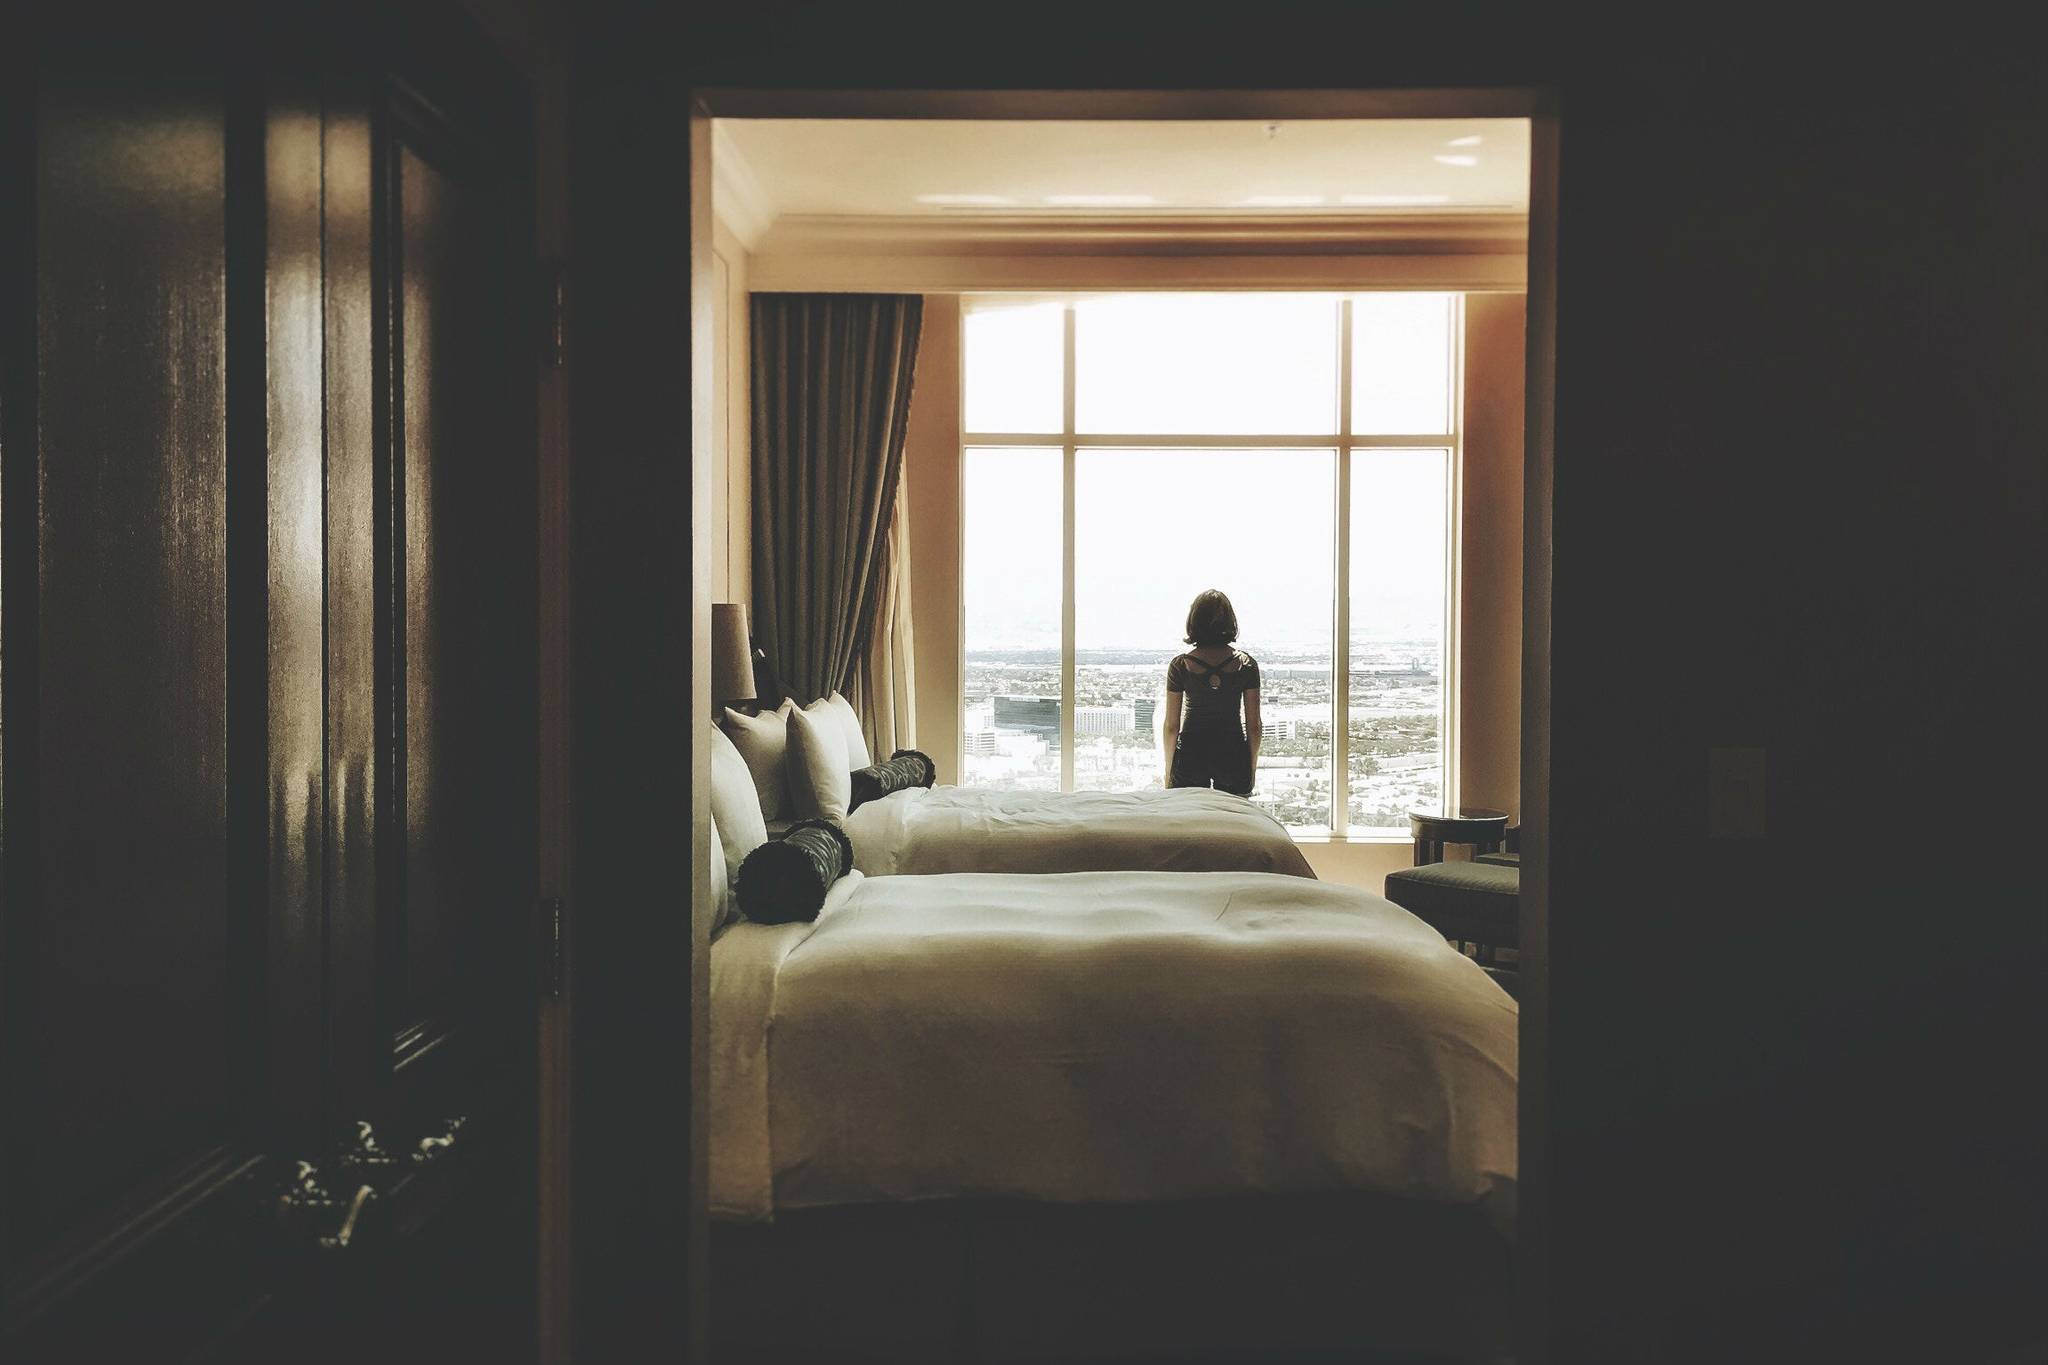 Eco-conscious hotel guests want to skip housekeeping